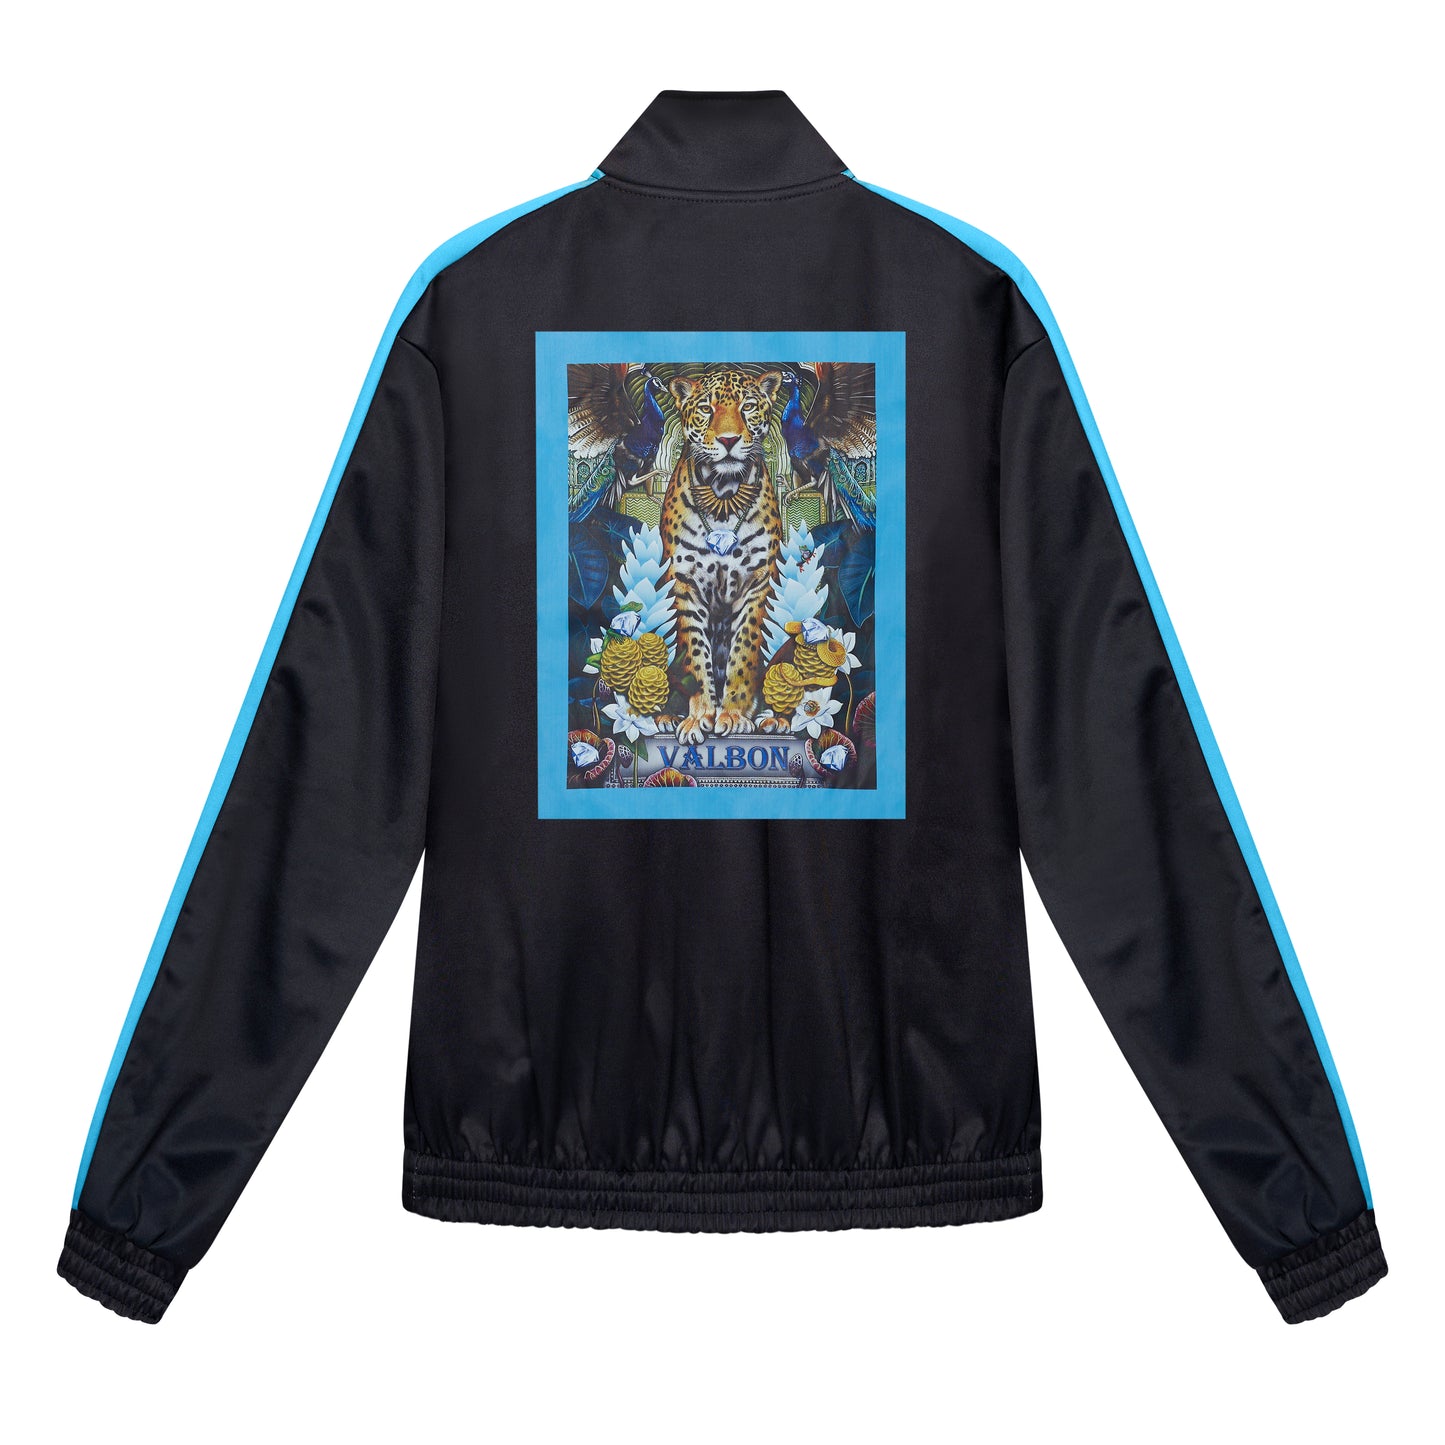 Classic Rubber Stamp Leopard Print Jacket in Blue & Black